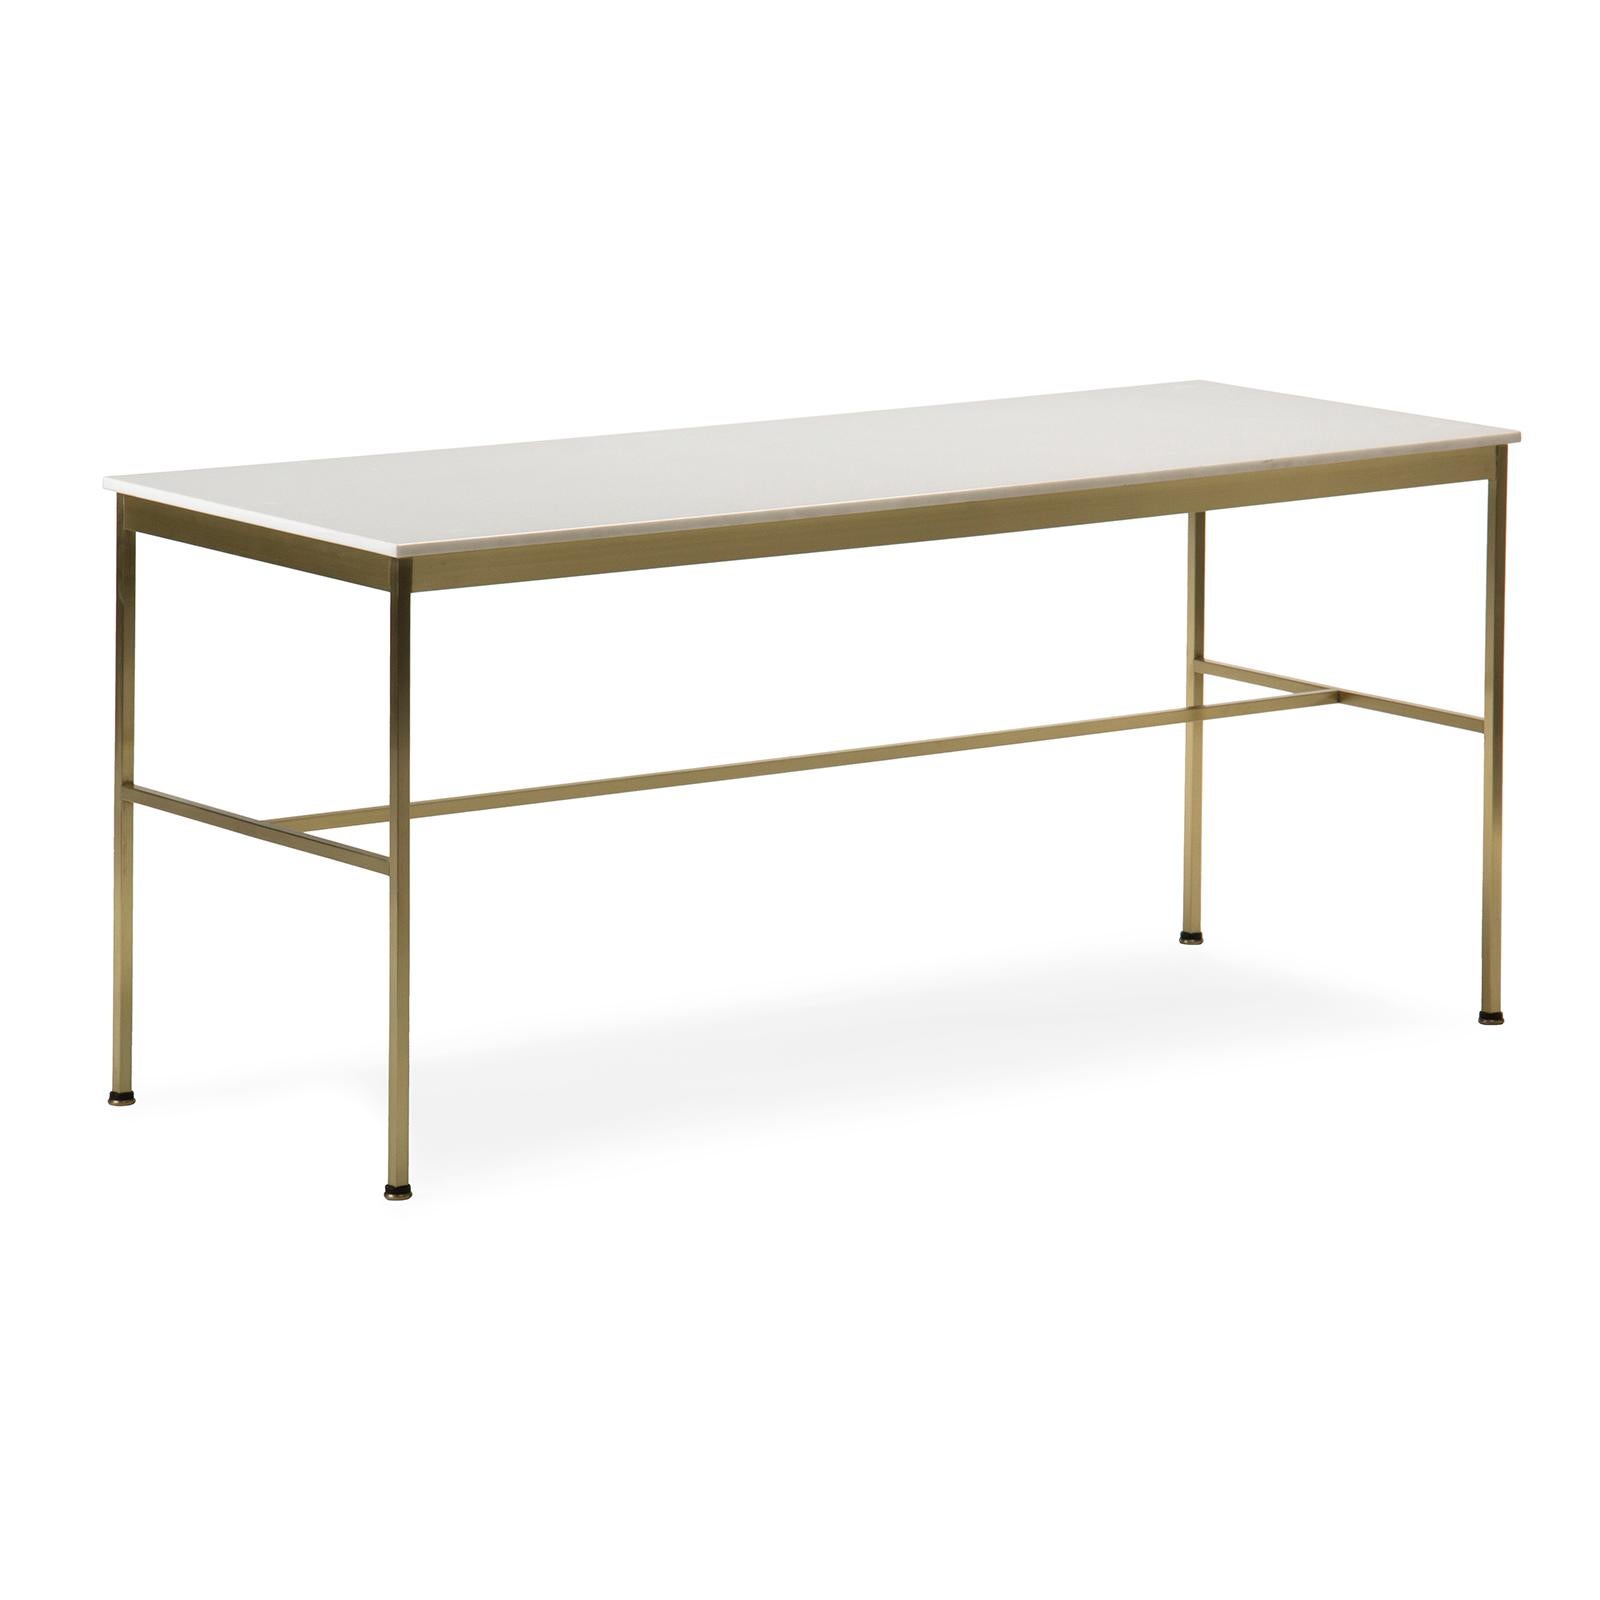 An elegant low coffee or cocktail table on a rectilinear brass base with a milk glass top.